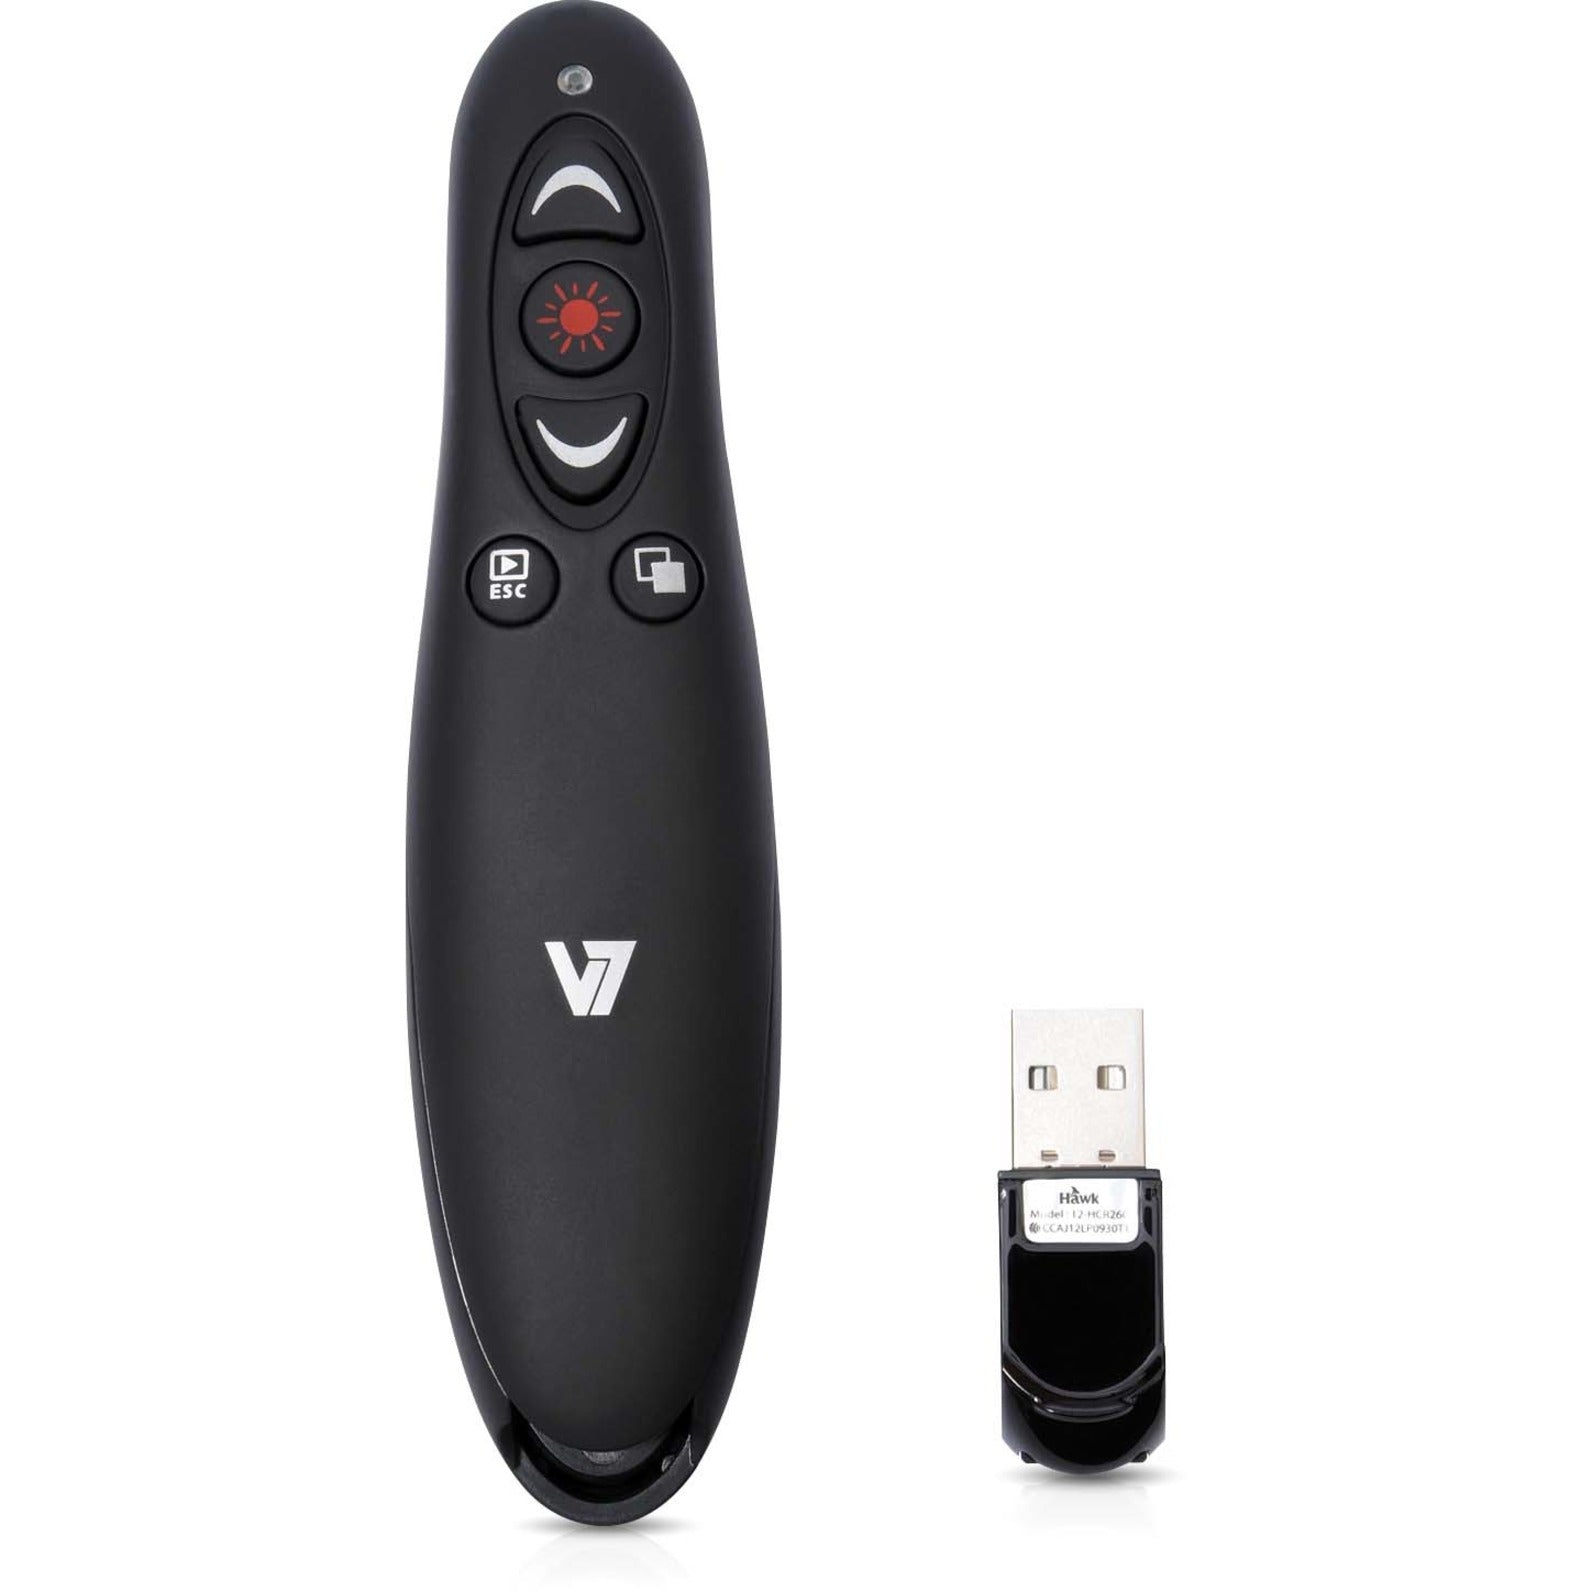 V7 WP1000-24G-19NB Professional Wireless Presenter with Laser Pointer and microSD Card Reader, 2-Year Warranty, Ergonomic Design